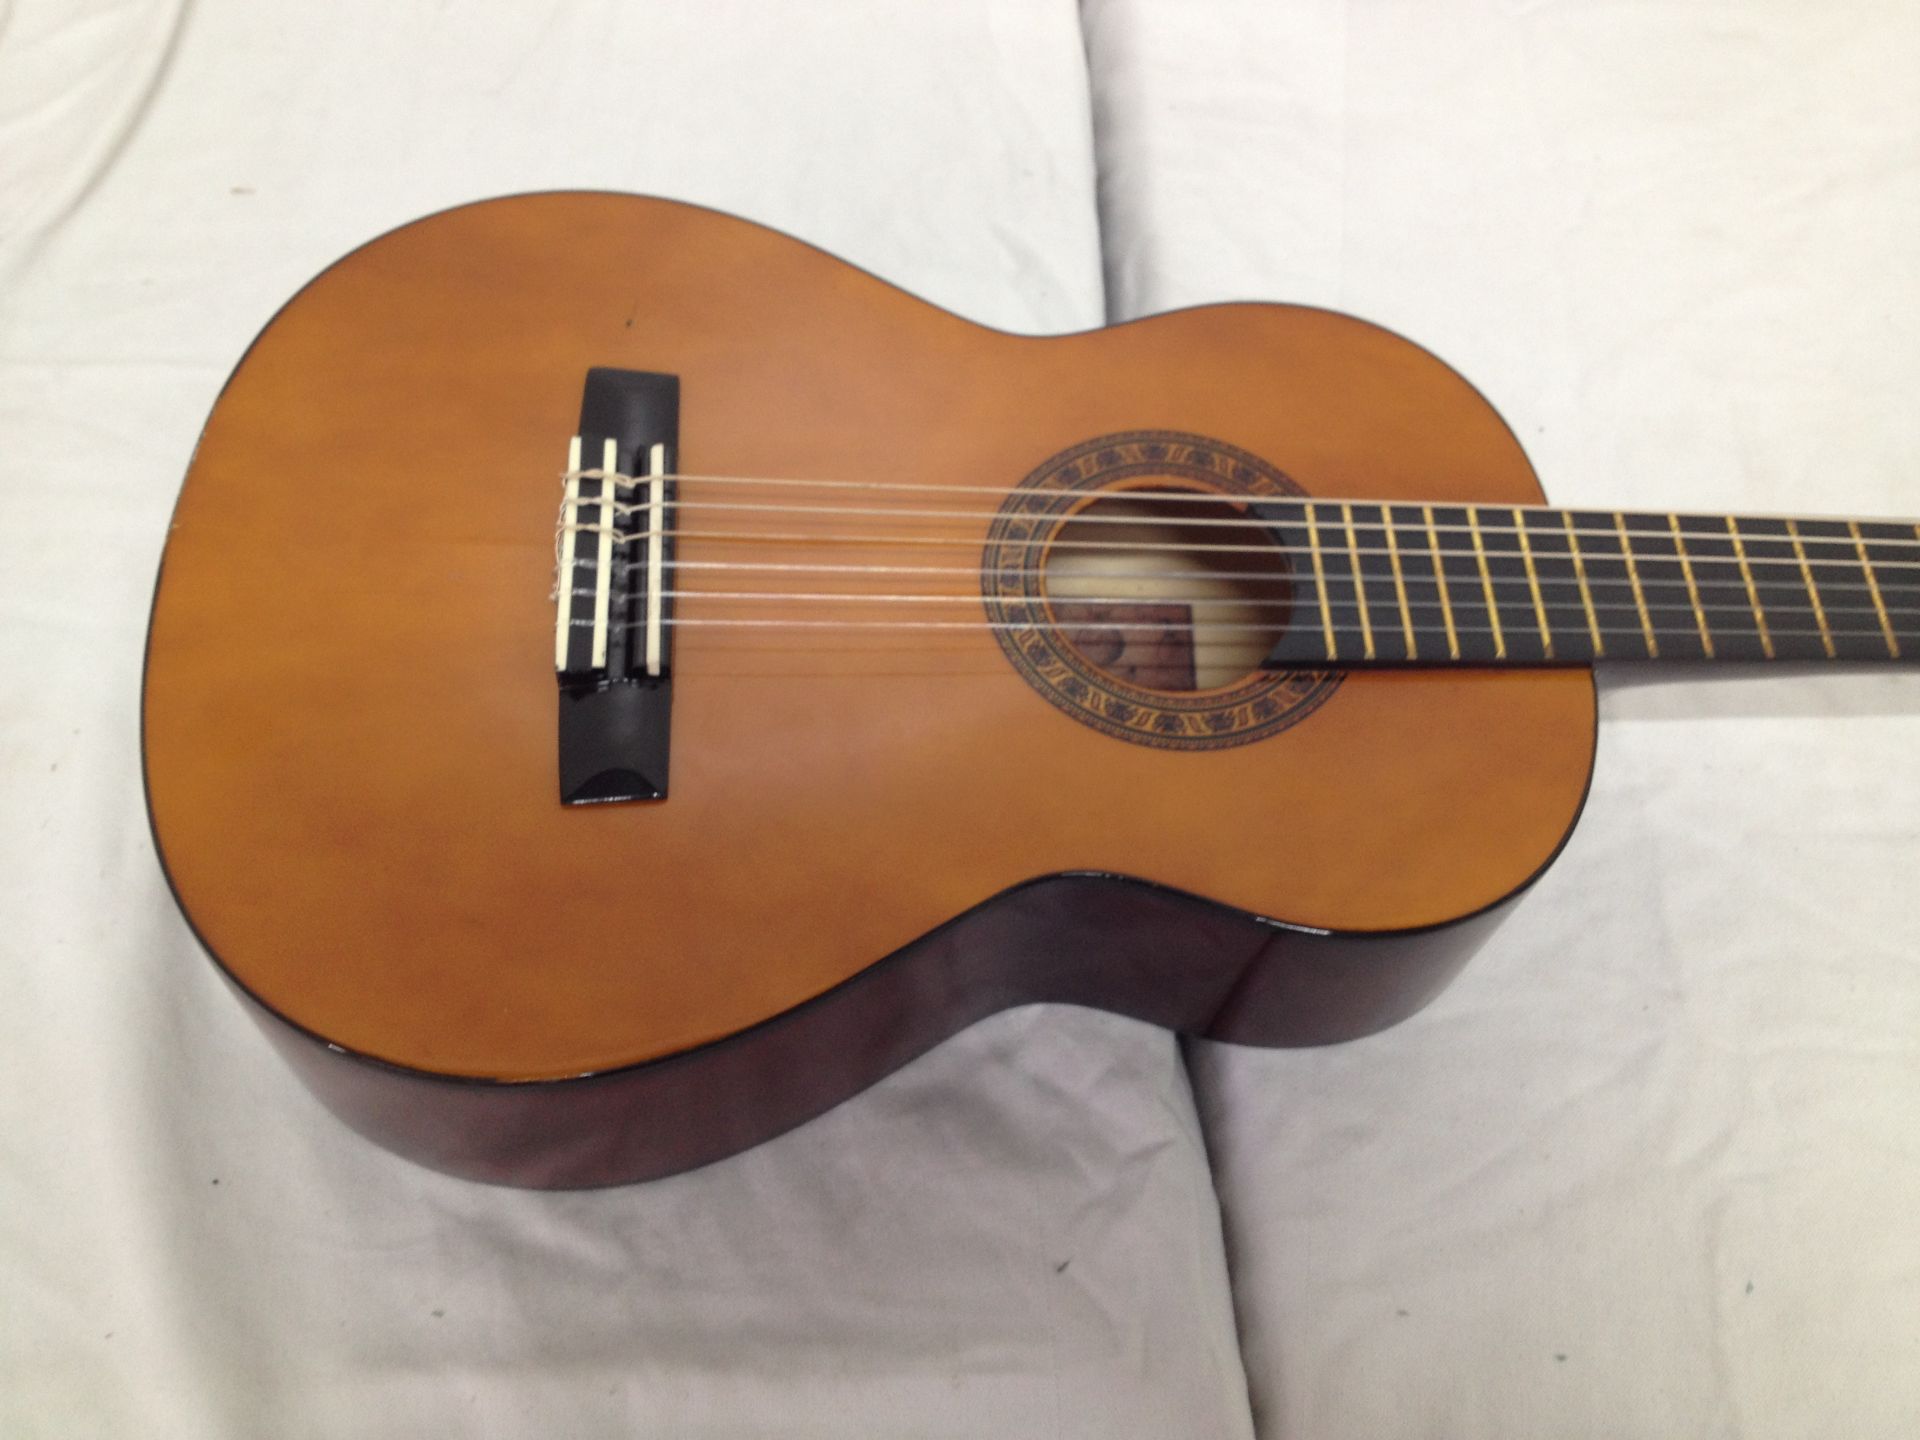 Ex Display Valencia CG 160 1/4 size classical acoustic Guitar 3103/F - Image 2 of 3